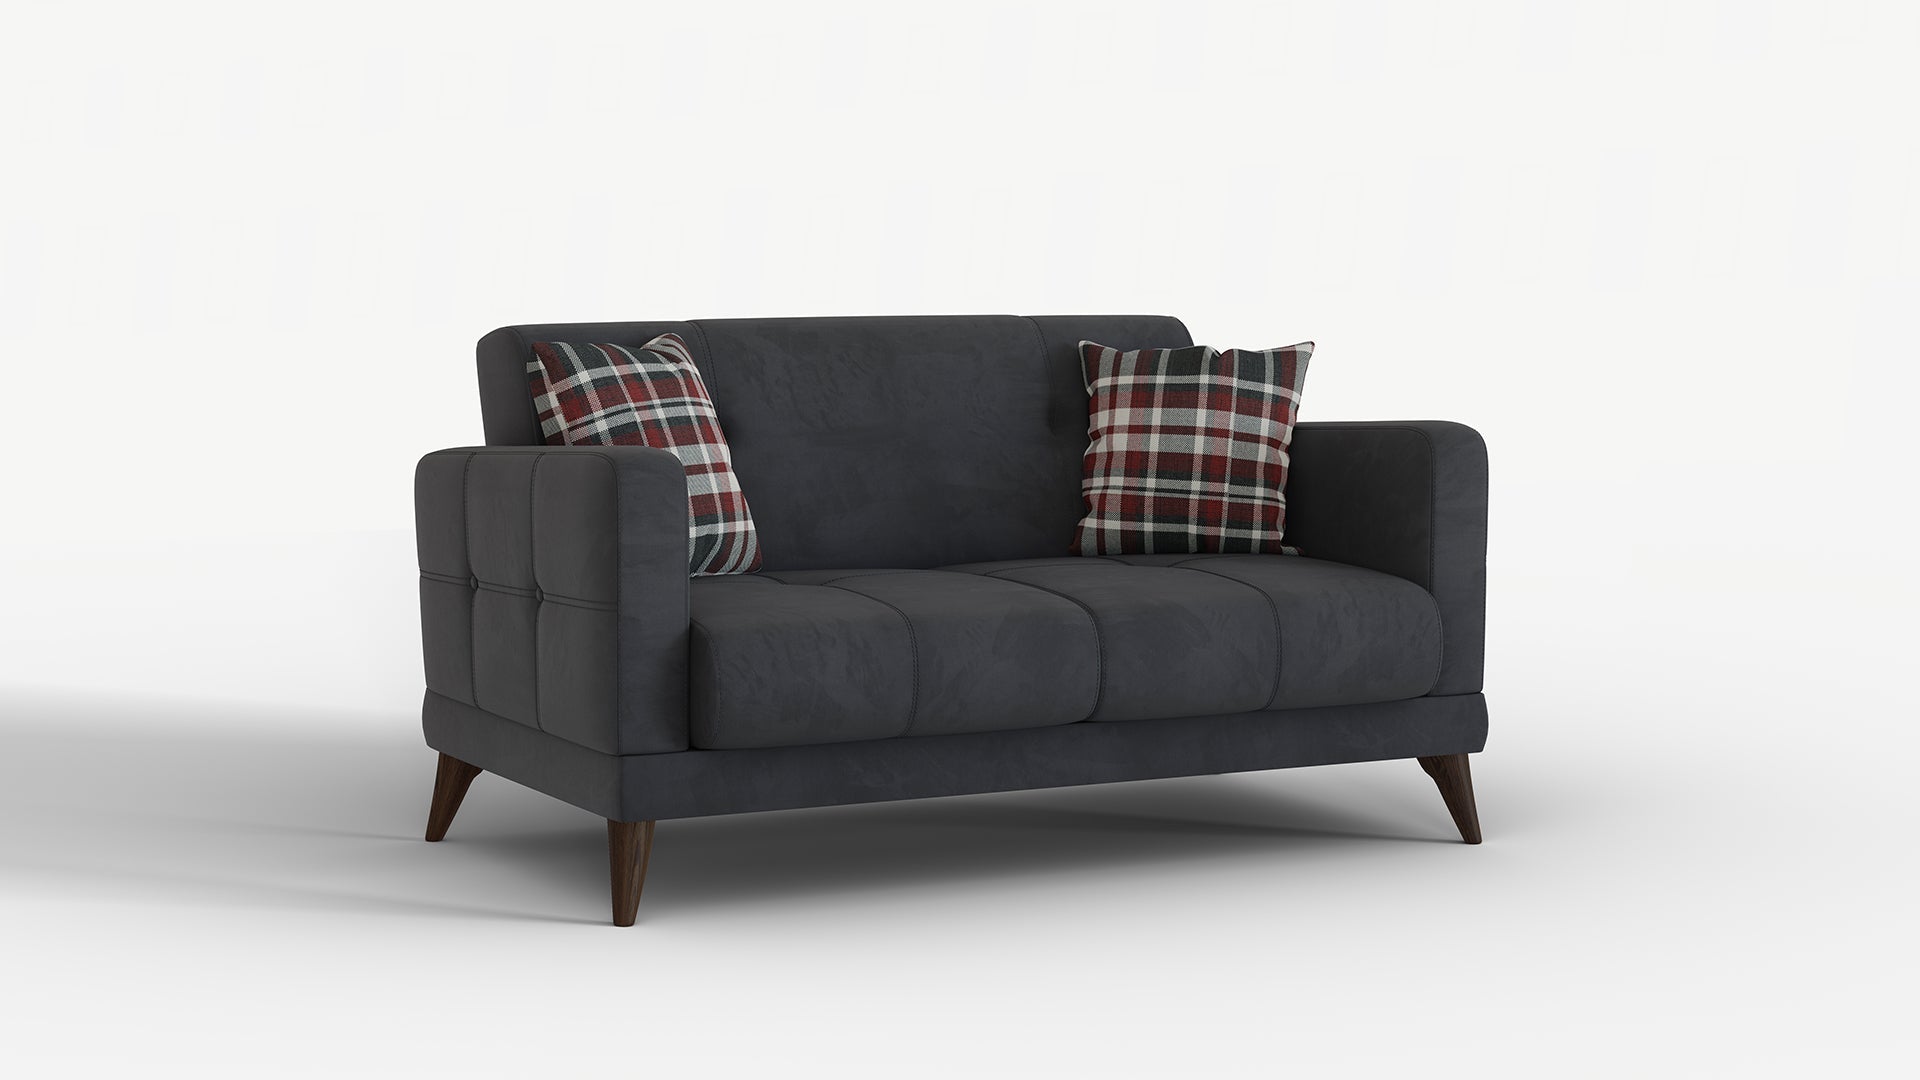 Mayer 2 Seater Sofa Bed